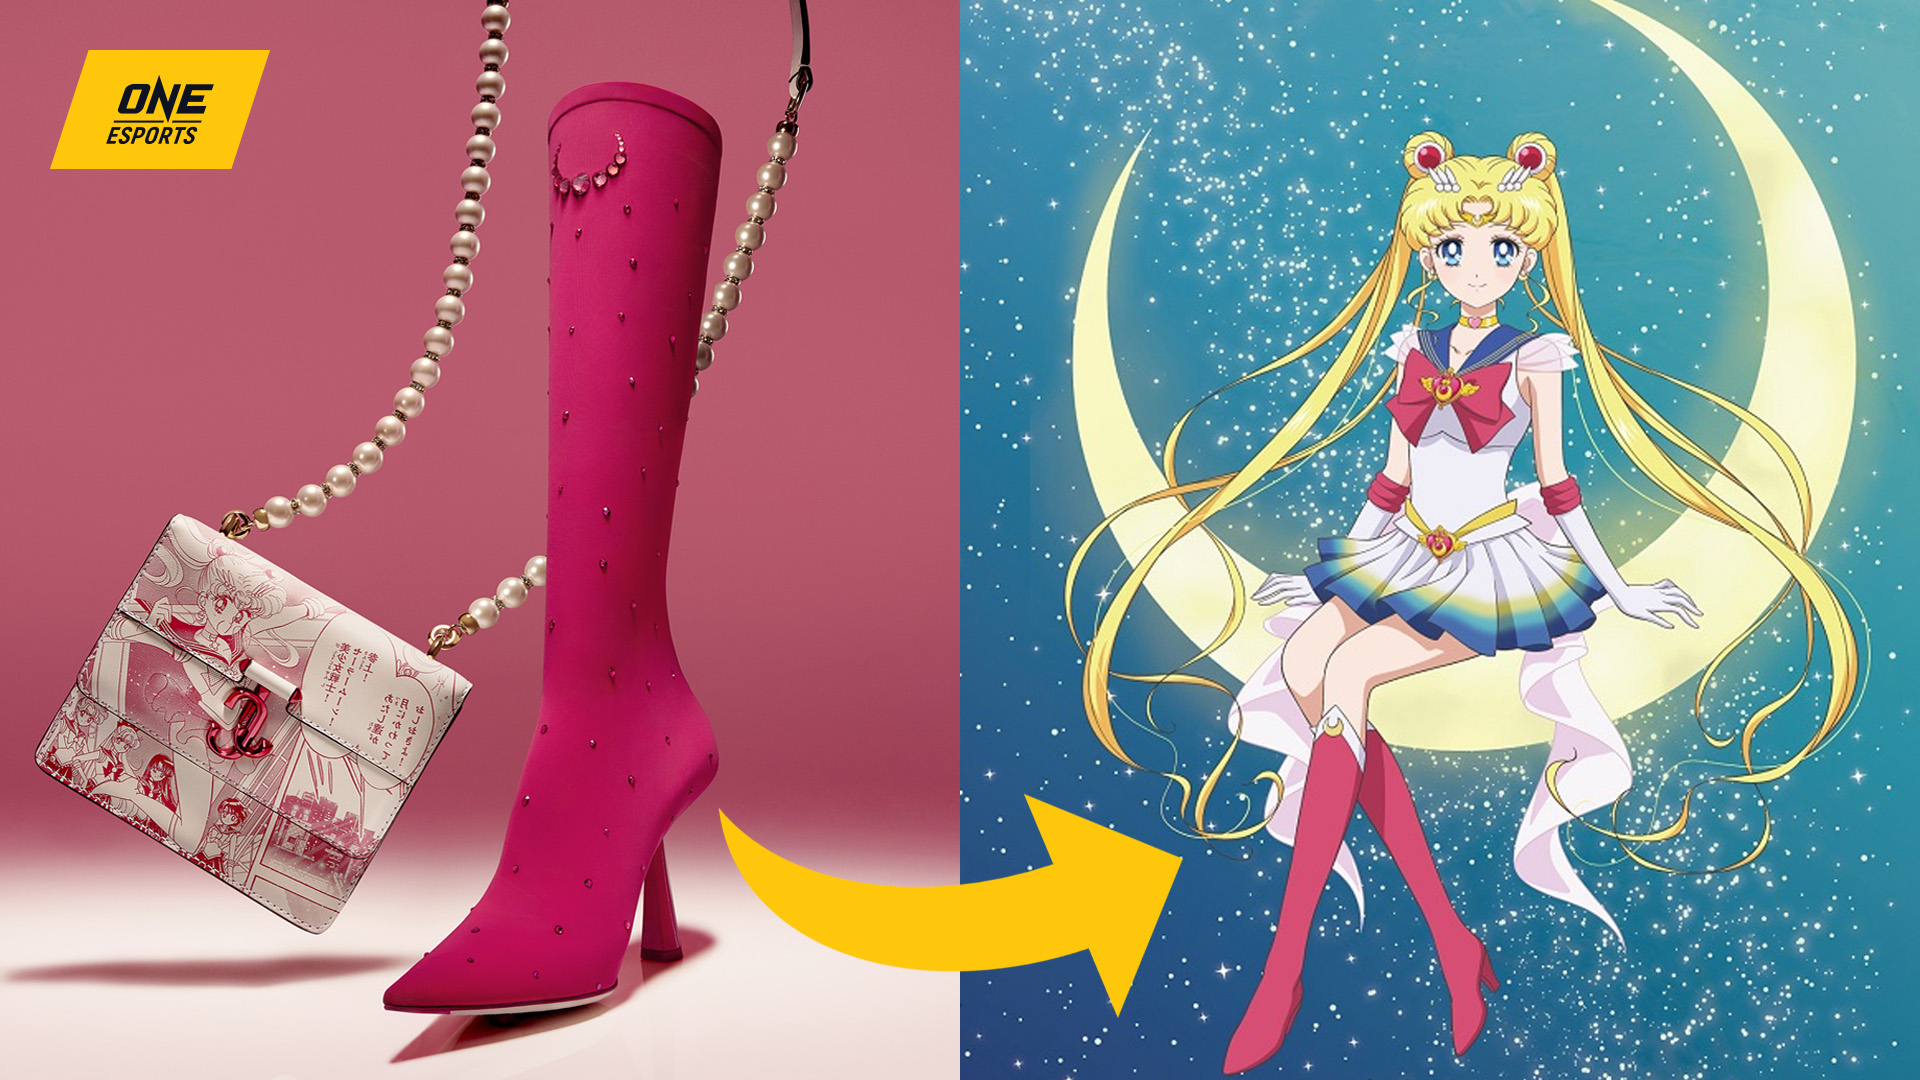 Jimmy Choo's Sailor Moon boots will set you back US$13K